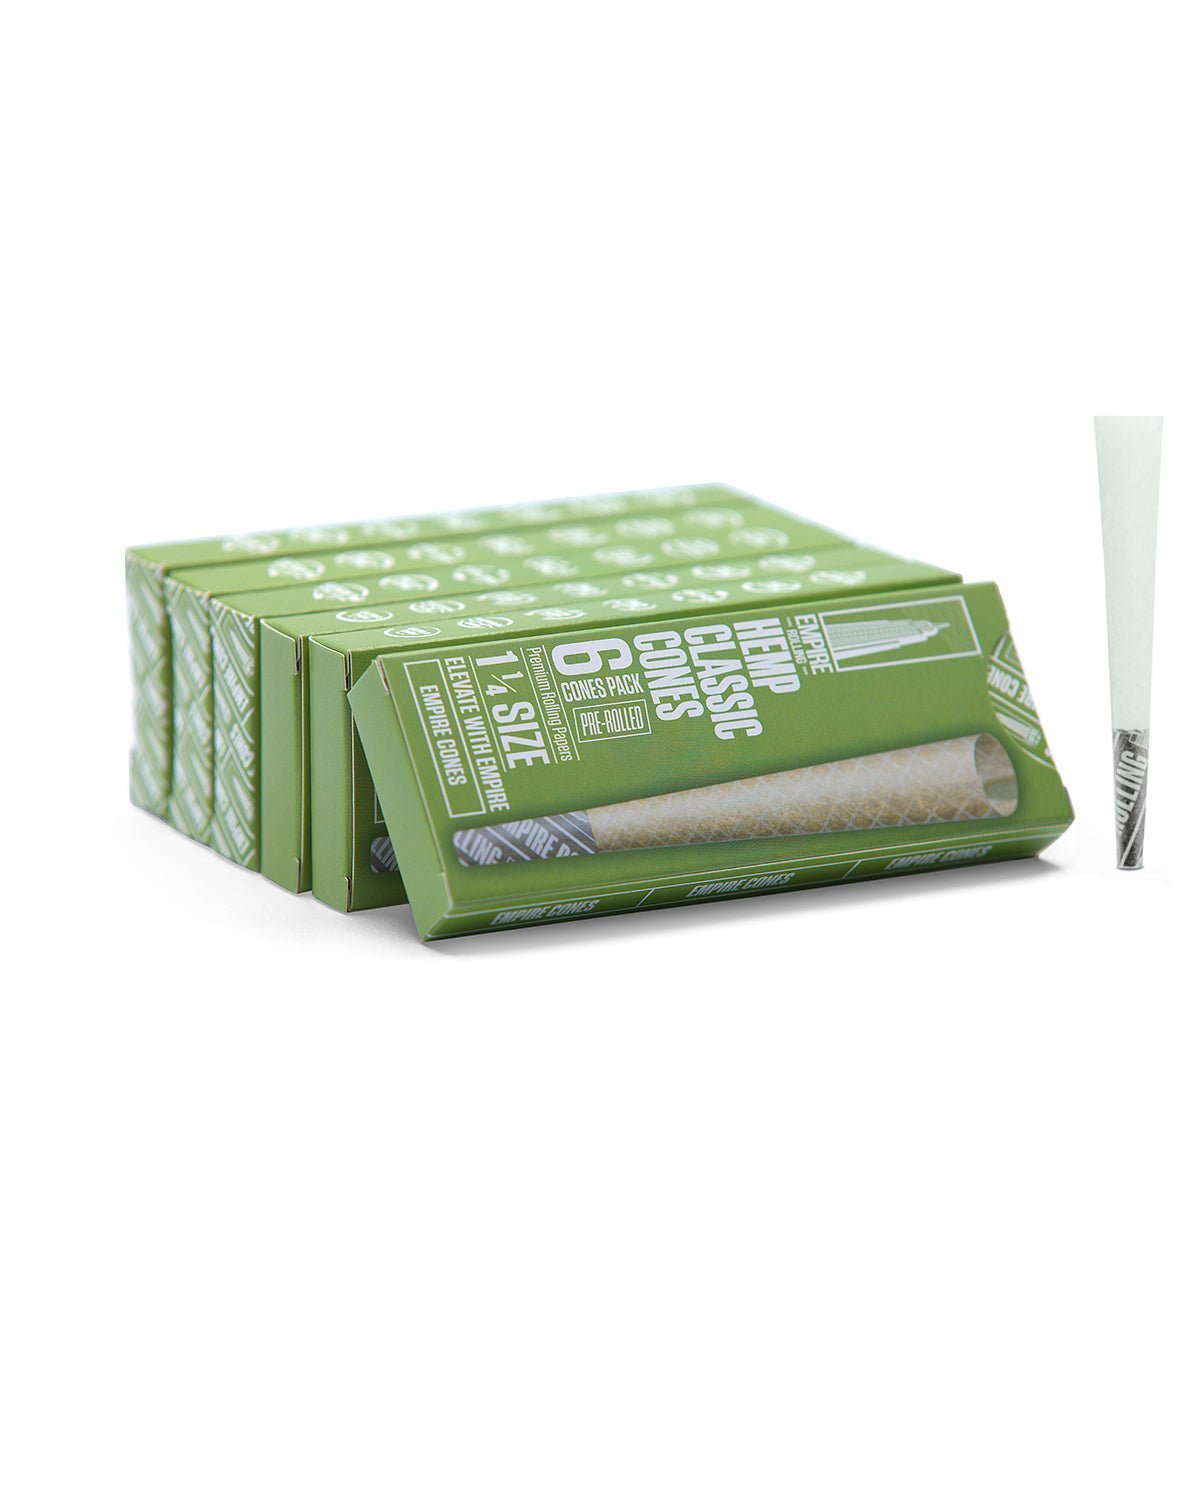 Empire Rolling's King Size Organic Hemp Rolling Papers, eco-friendly and crafted with high-quality, natural materials for a premium smoking experience.UltraSmooth Hemp 1.25 Size 6-Count - Empire Rolling Papers